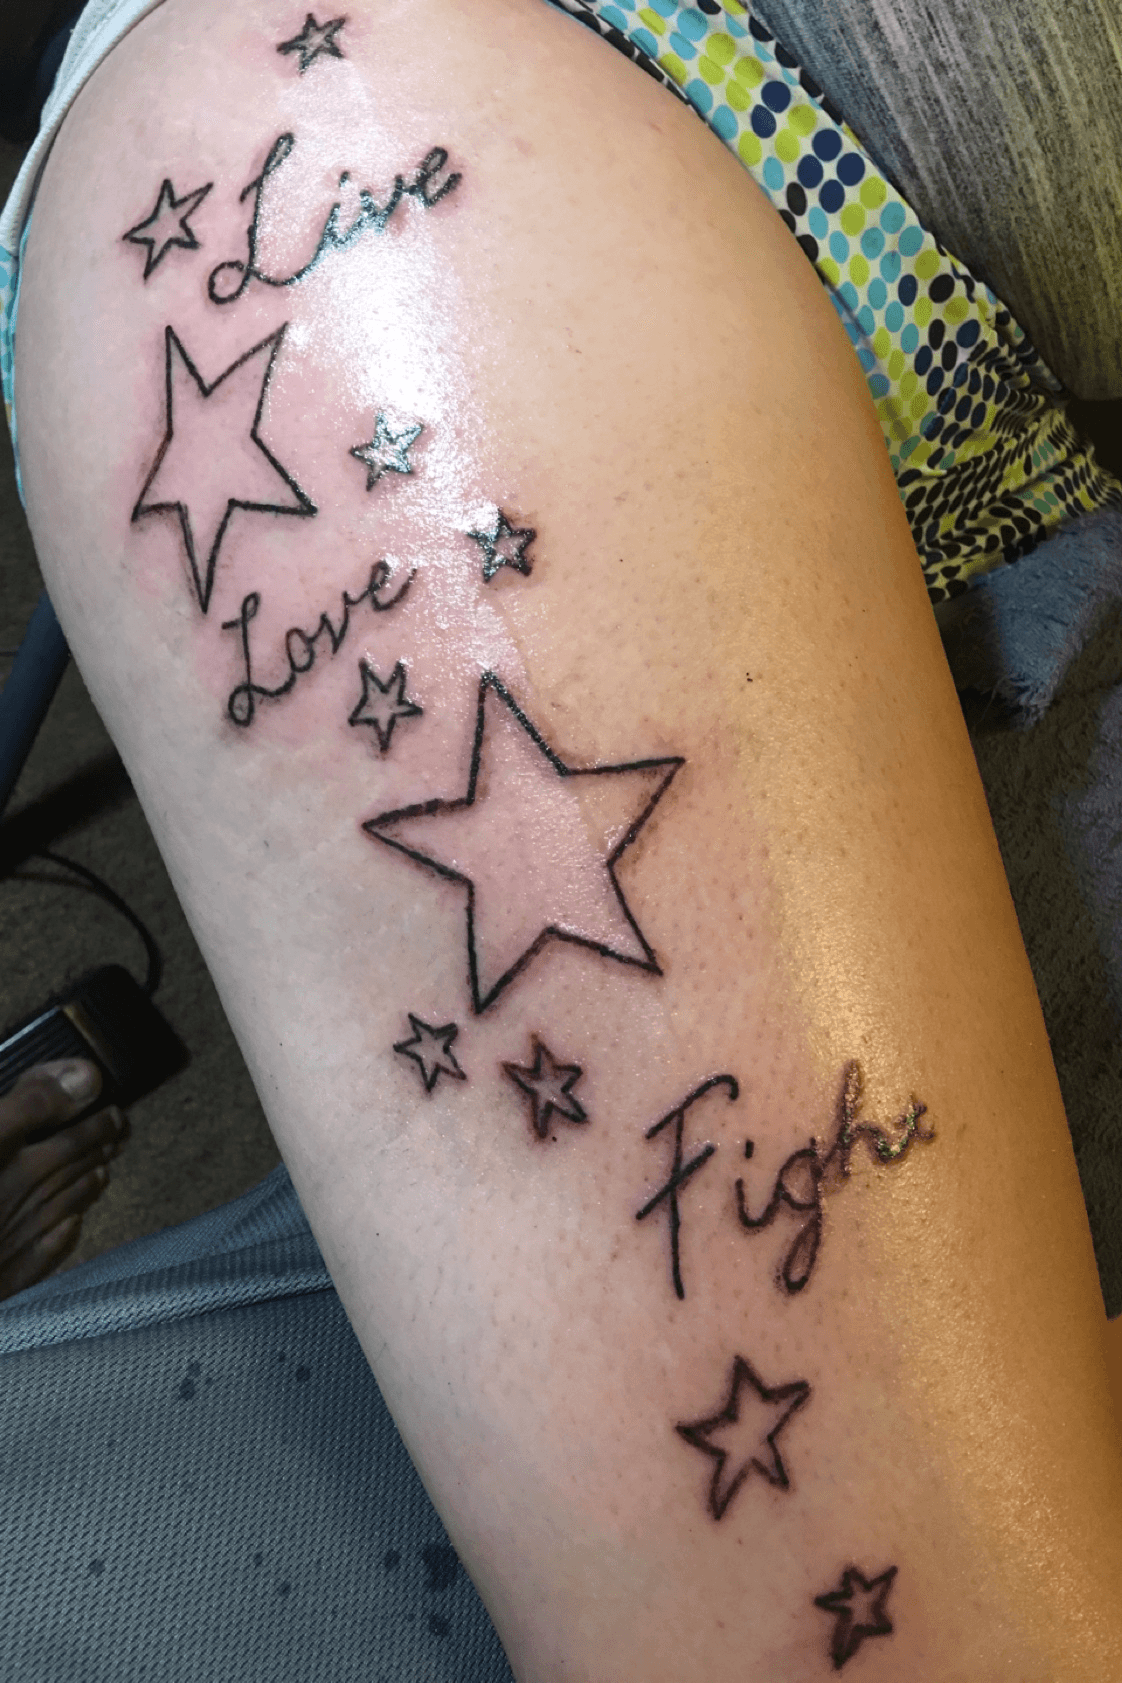 All the kids they say live to fight another day live to fight again from  Kasabian  Stevie made by Okin at Surreal Vision Tattoo  Odivelas  Portugal  rtattoos